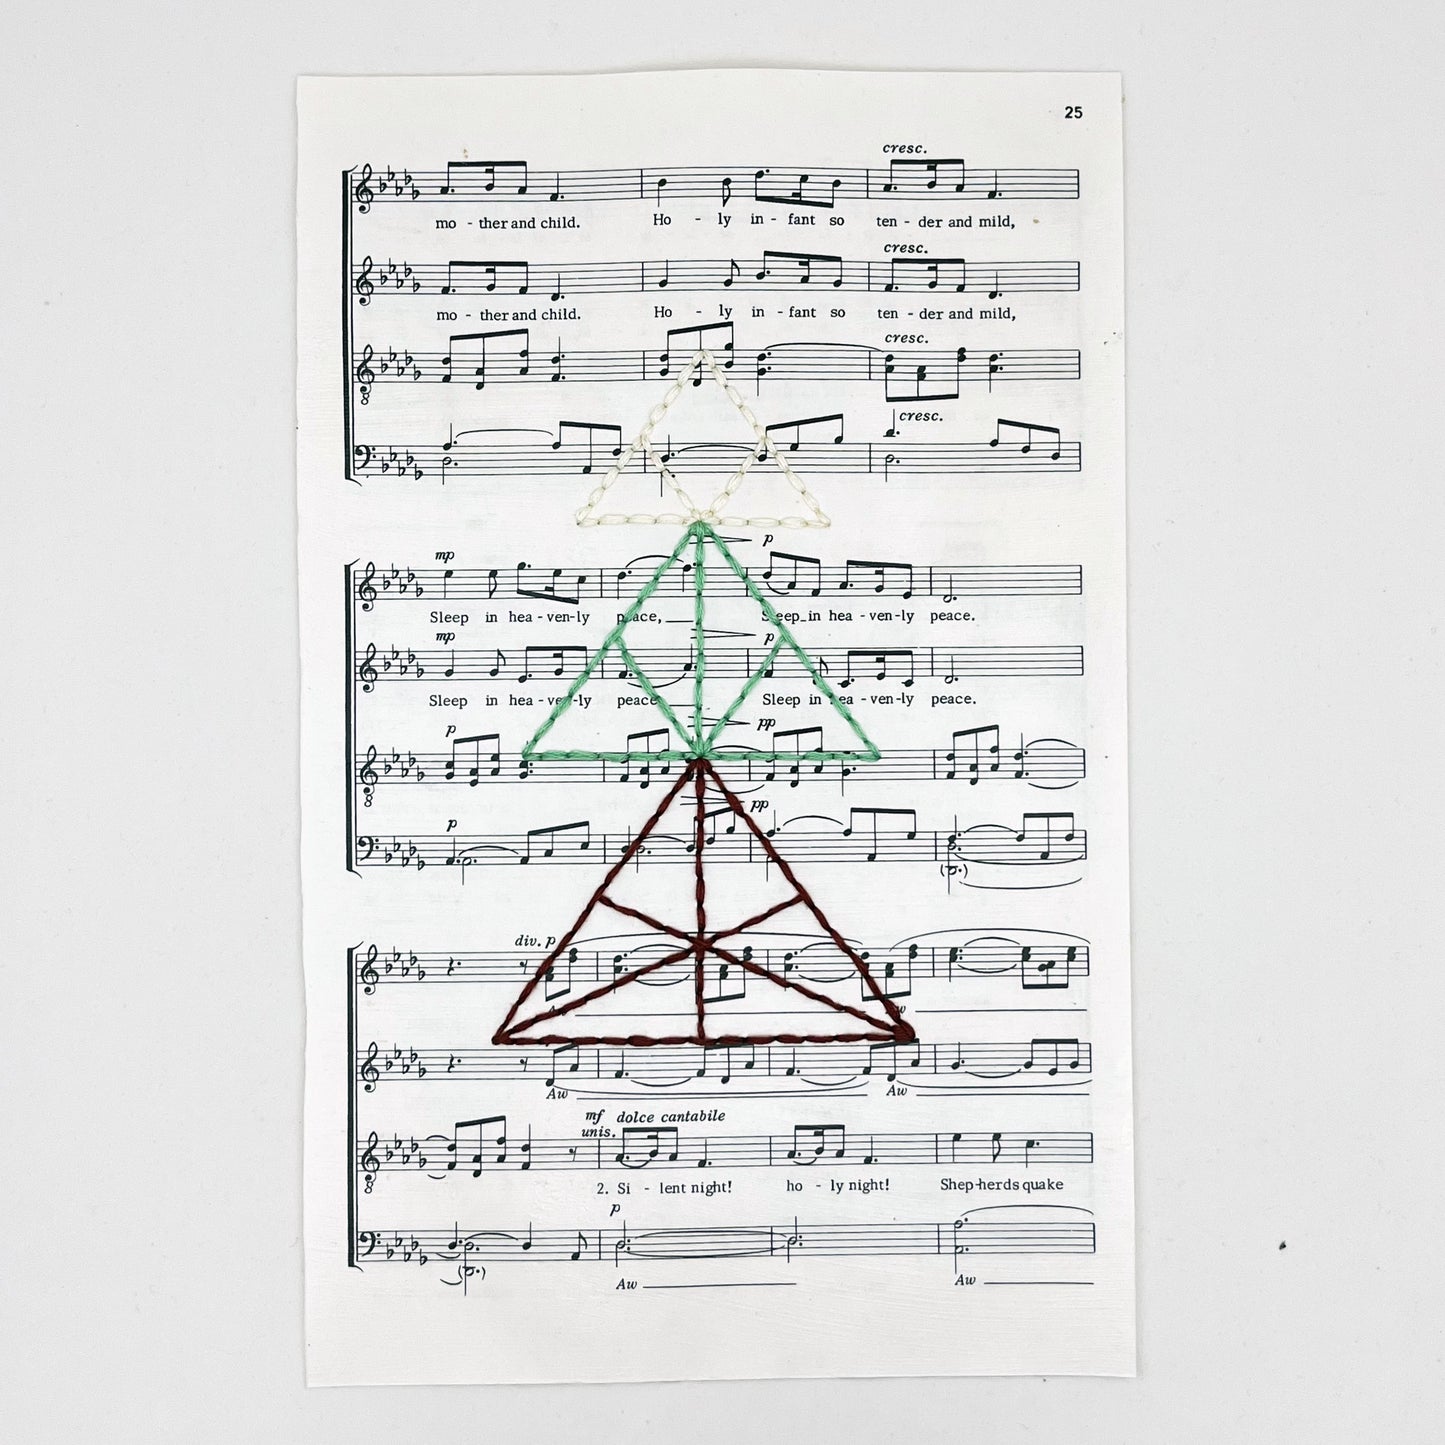 sheet music from the Christmas song "Silent Night", hand stitched over with a Christmas tree made from triangles, in red, green and ivory thread